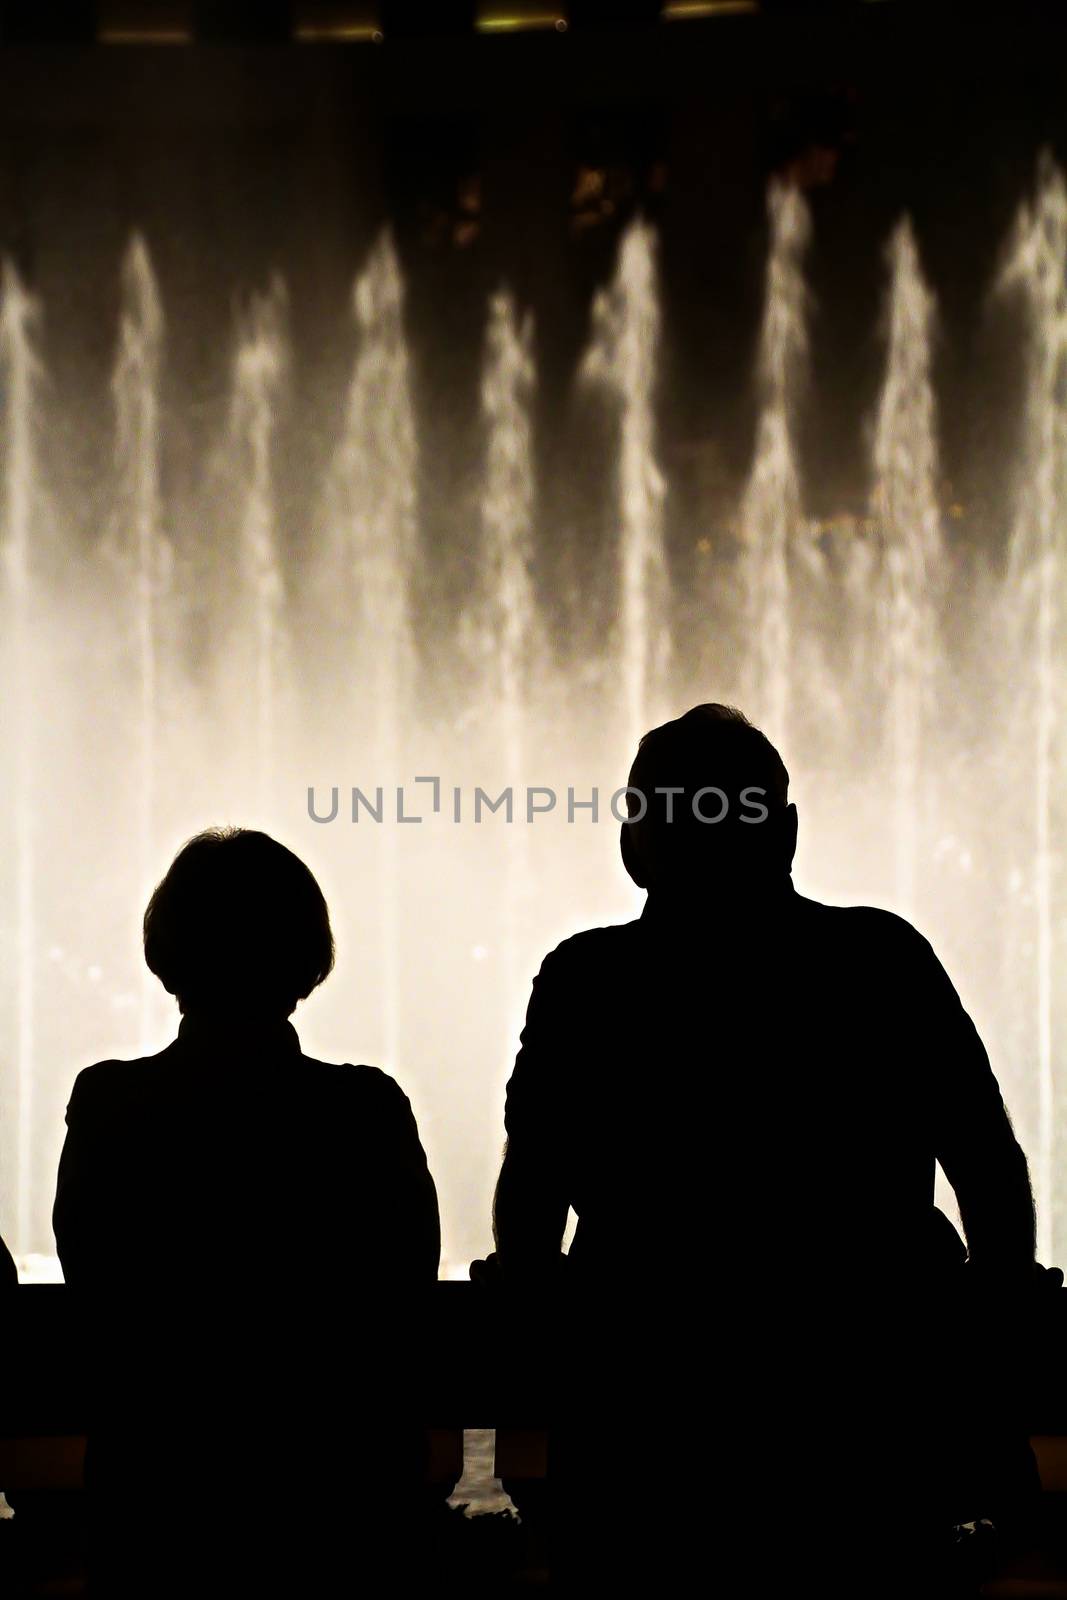 Night scene with silhouettes of people admiring the Bellagio fountains spectacle at Las Vegas